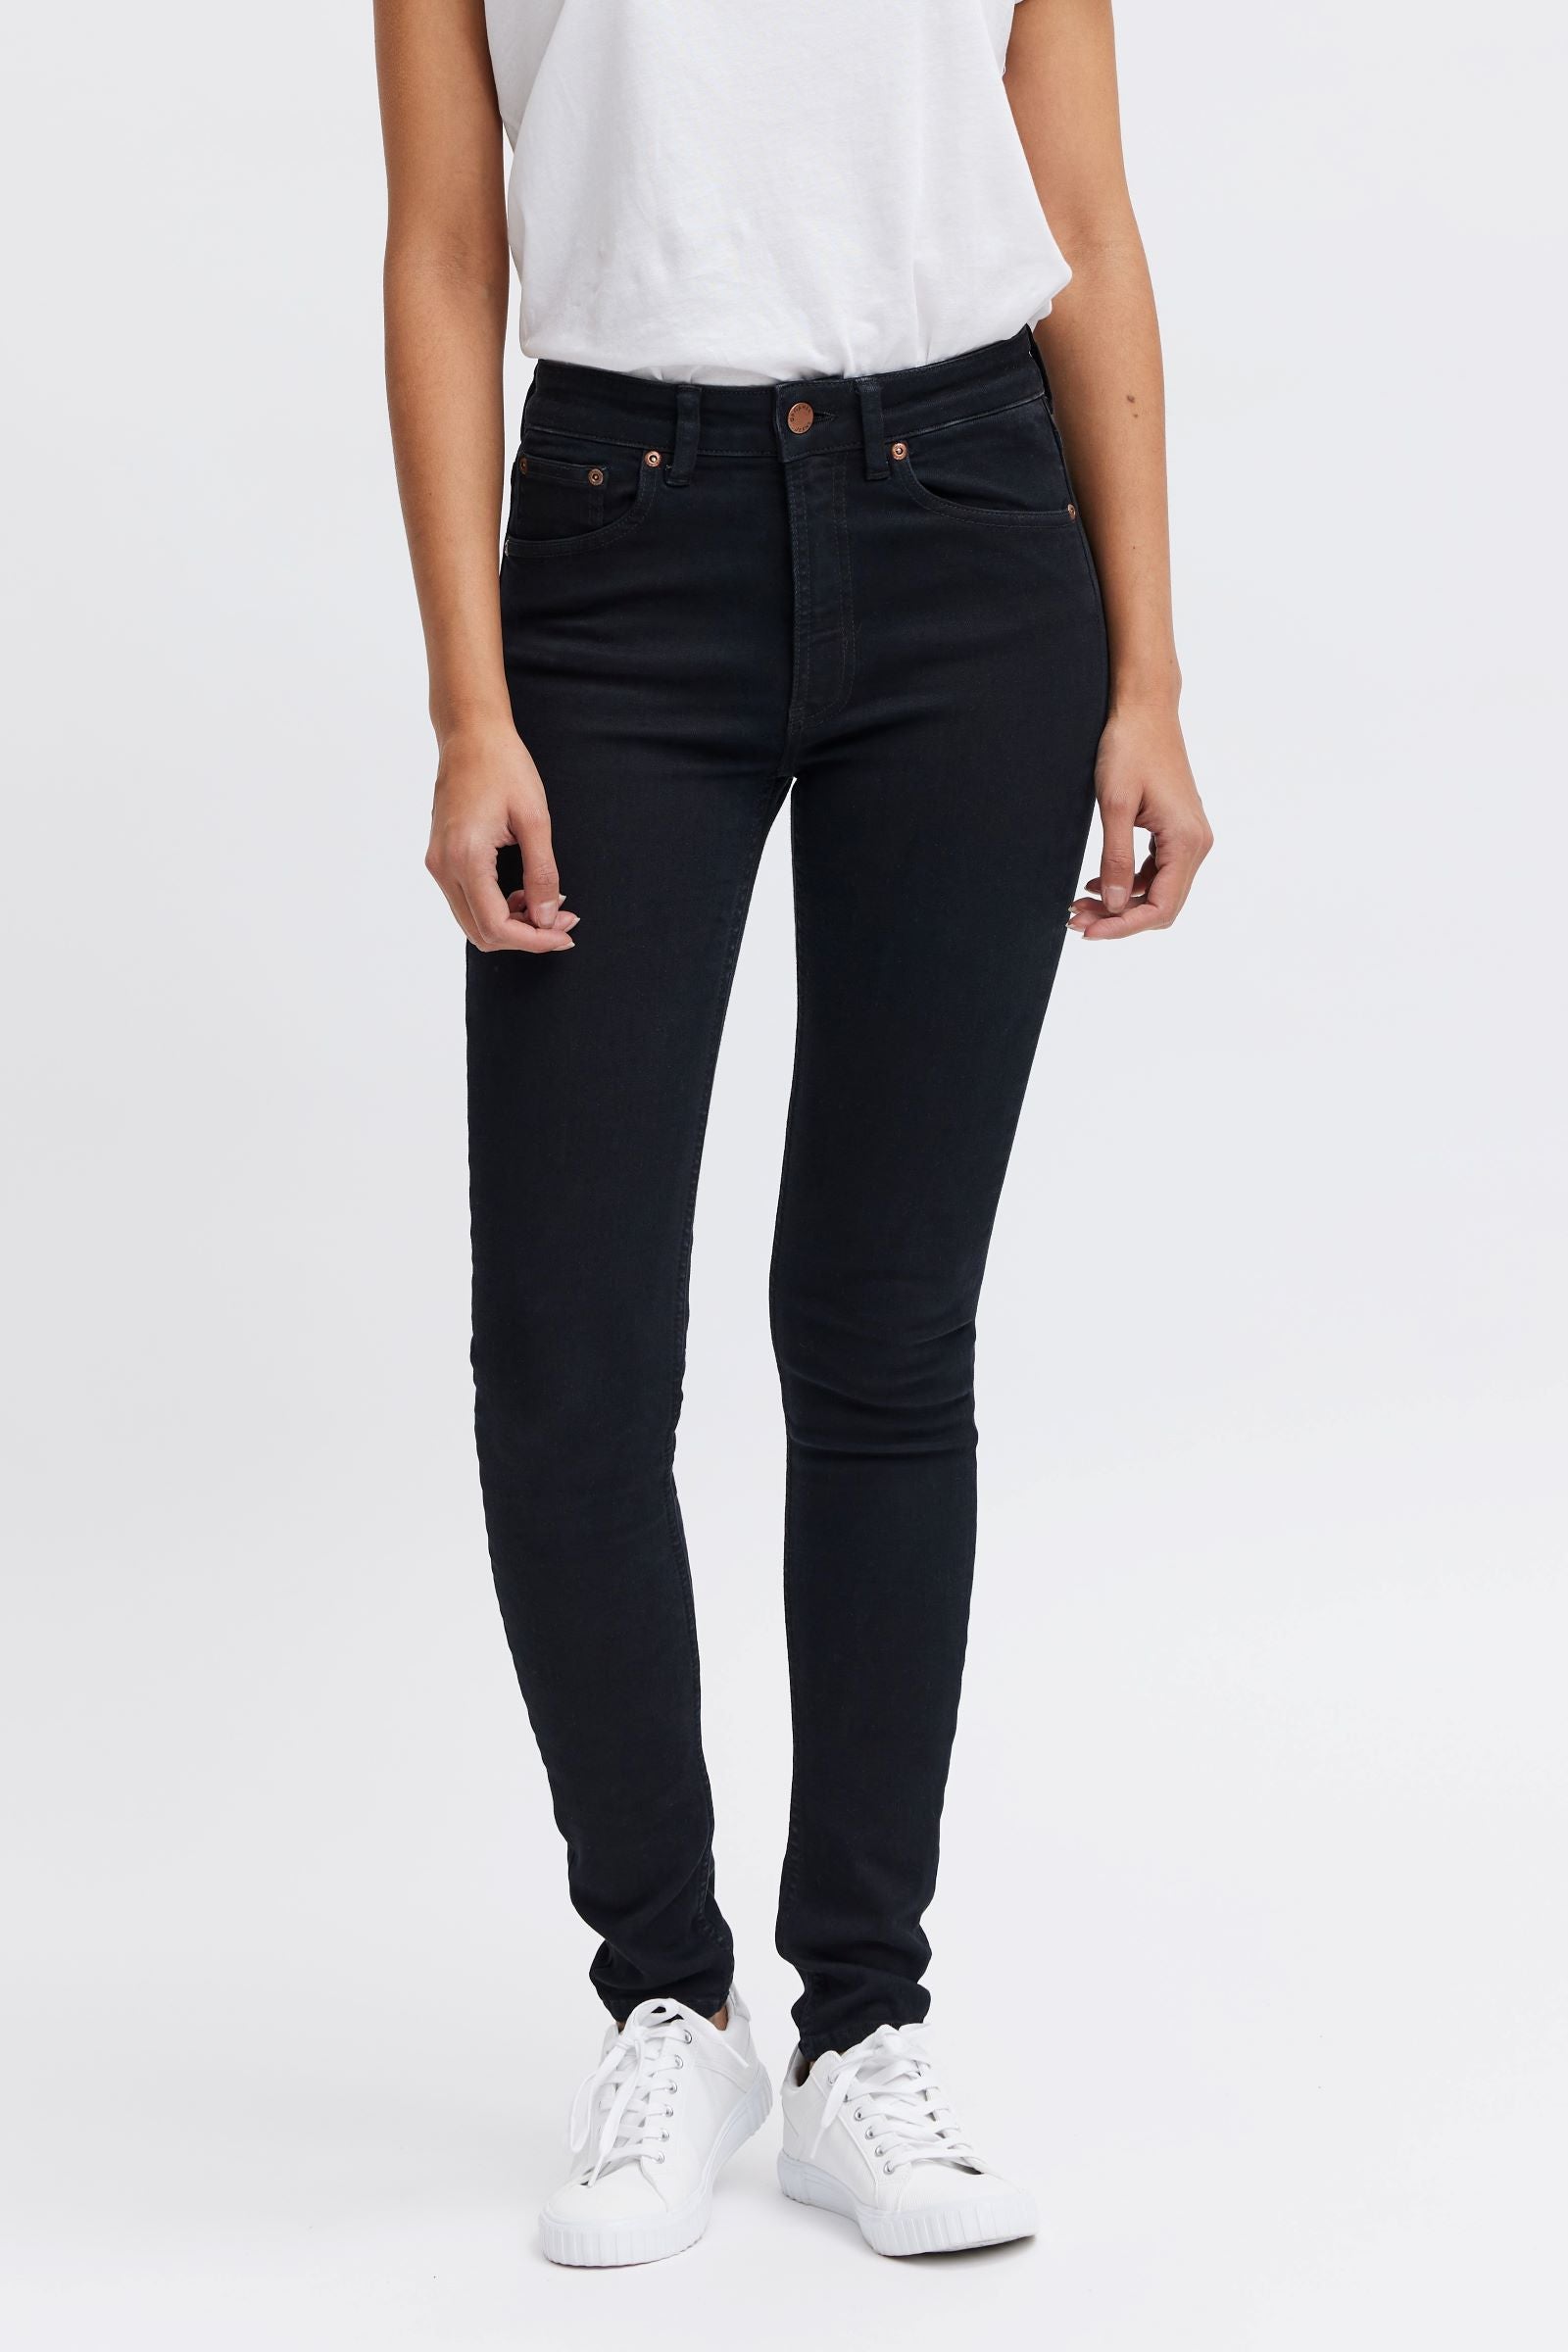 Womens - Organic Cotton High Waisted Skinny Flare Jeans in Black